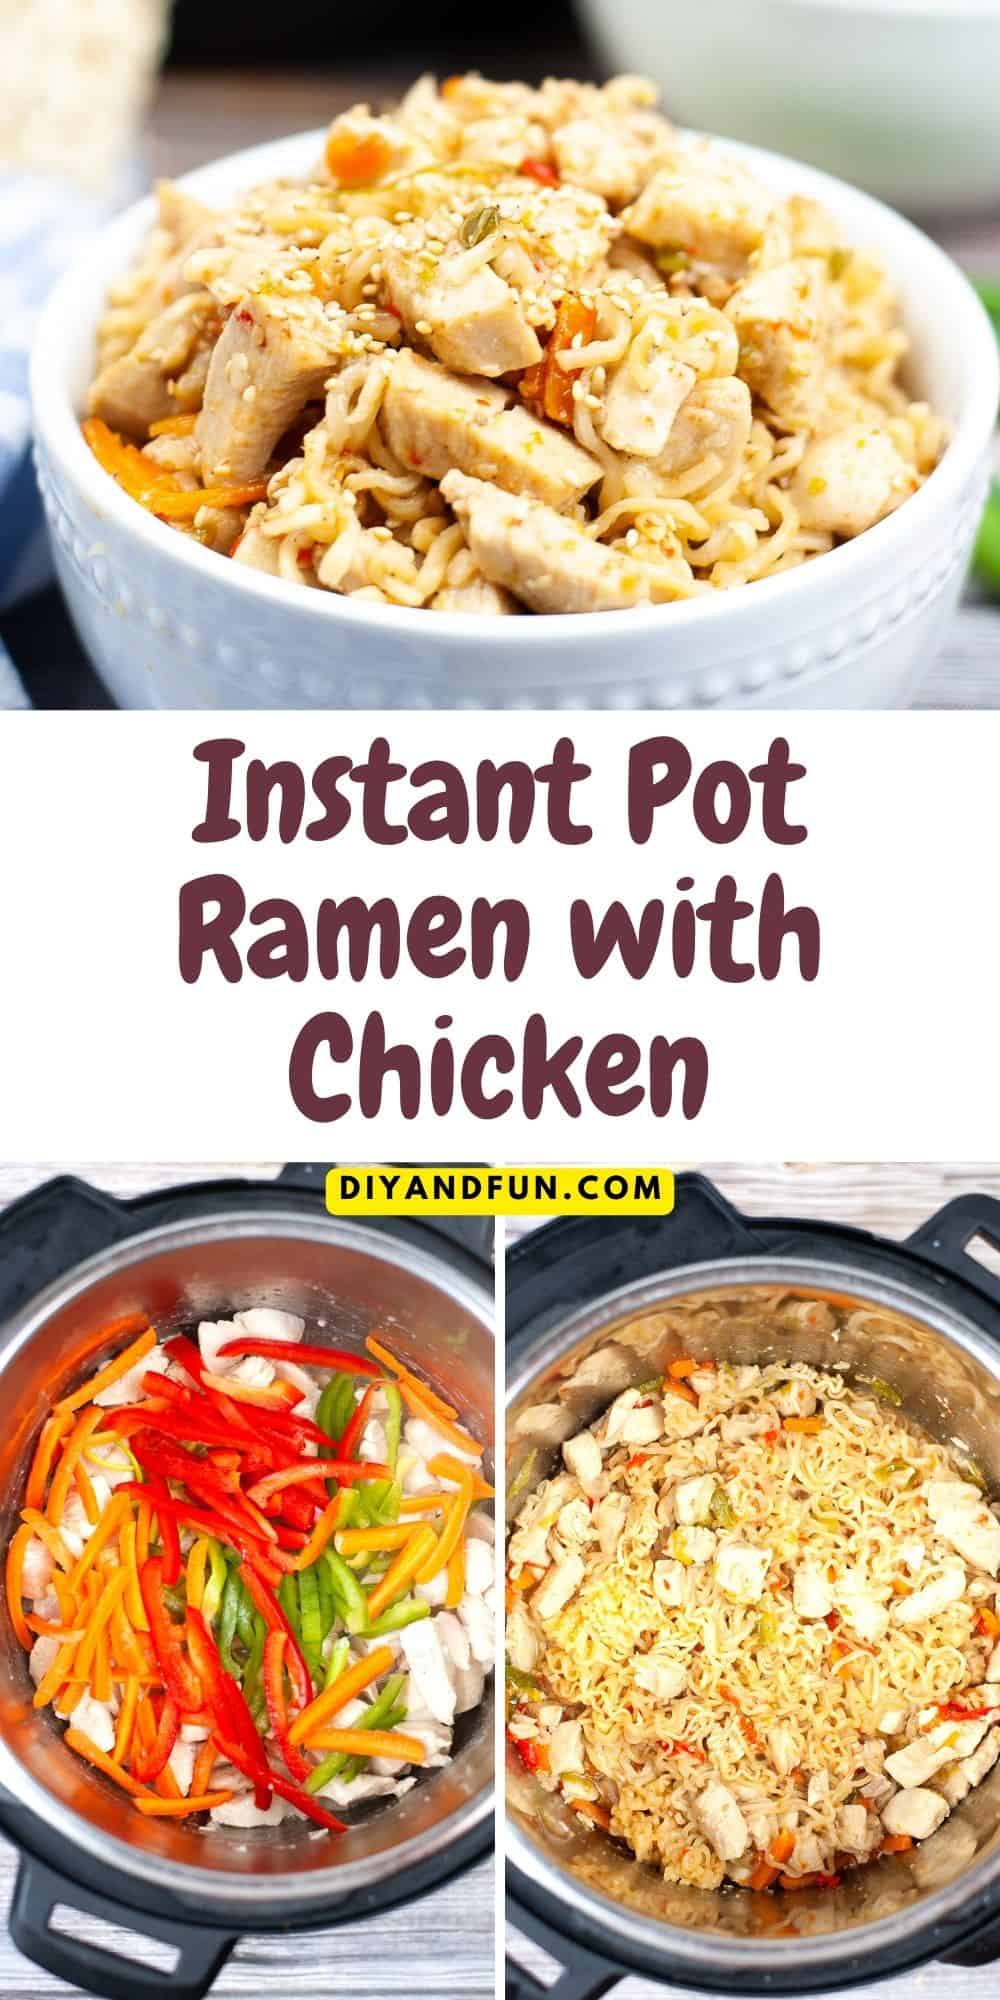 Instant Pot Ramen with Chicken, a simple and delicious dinner recipe made in less than a half hour in a pressure cooker.